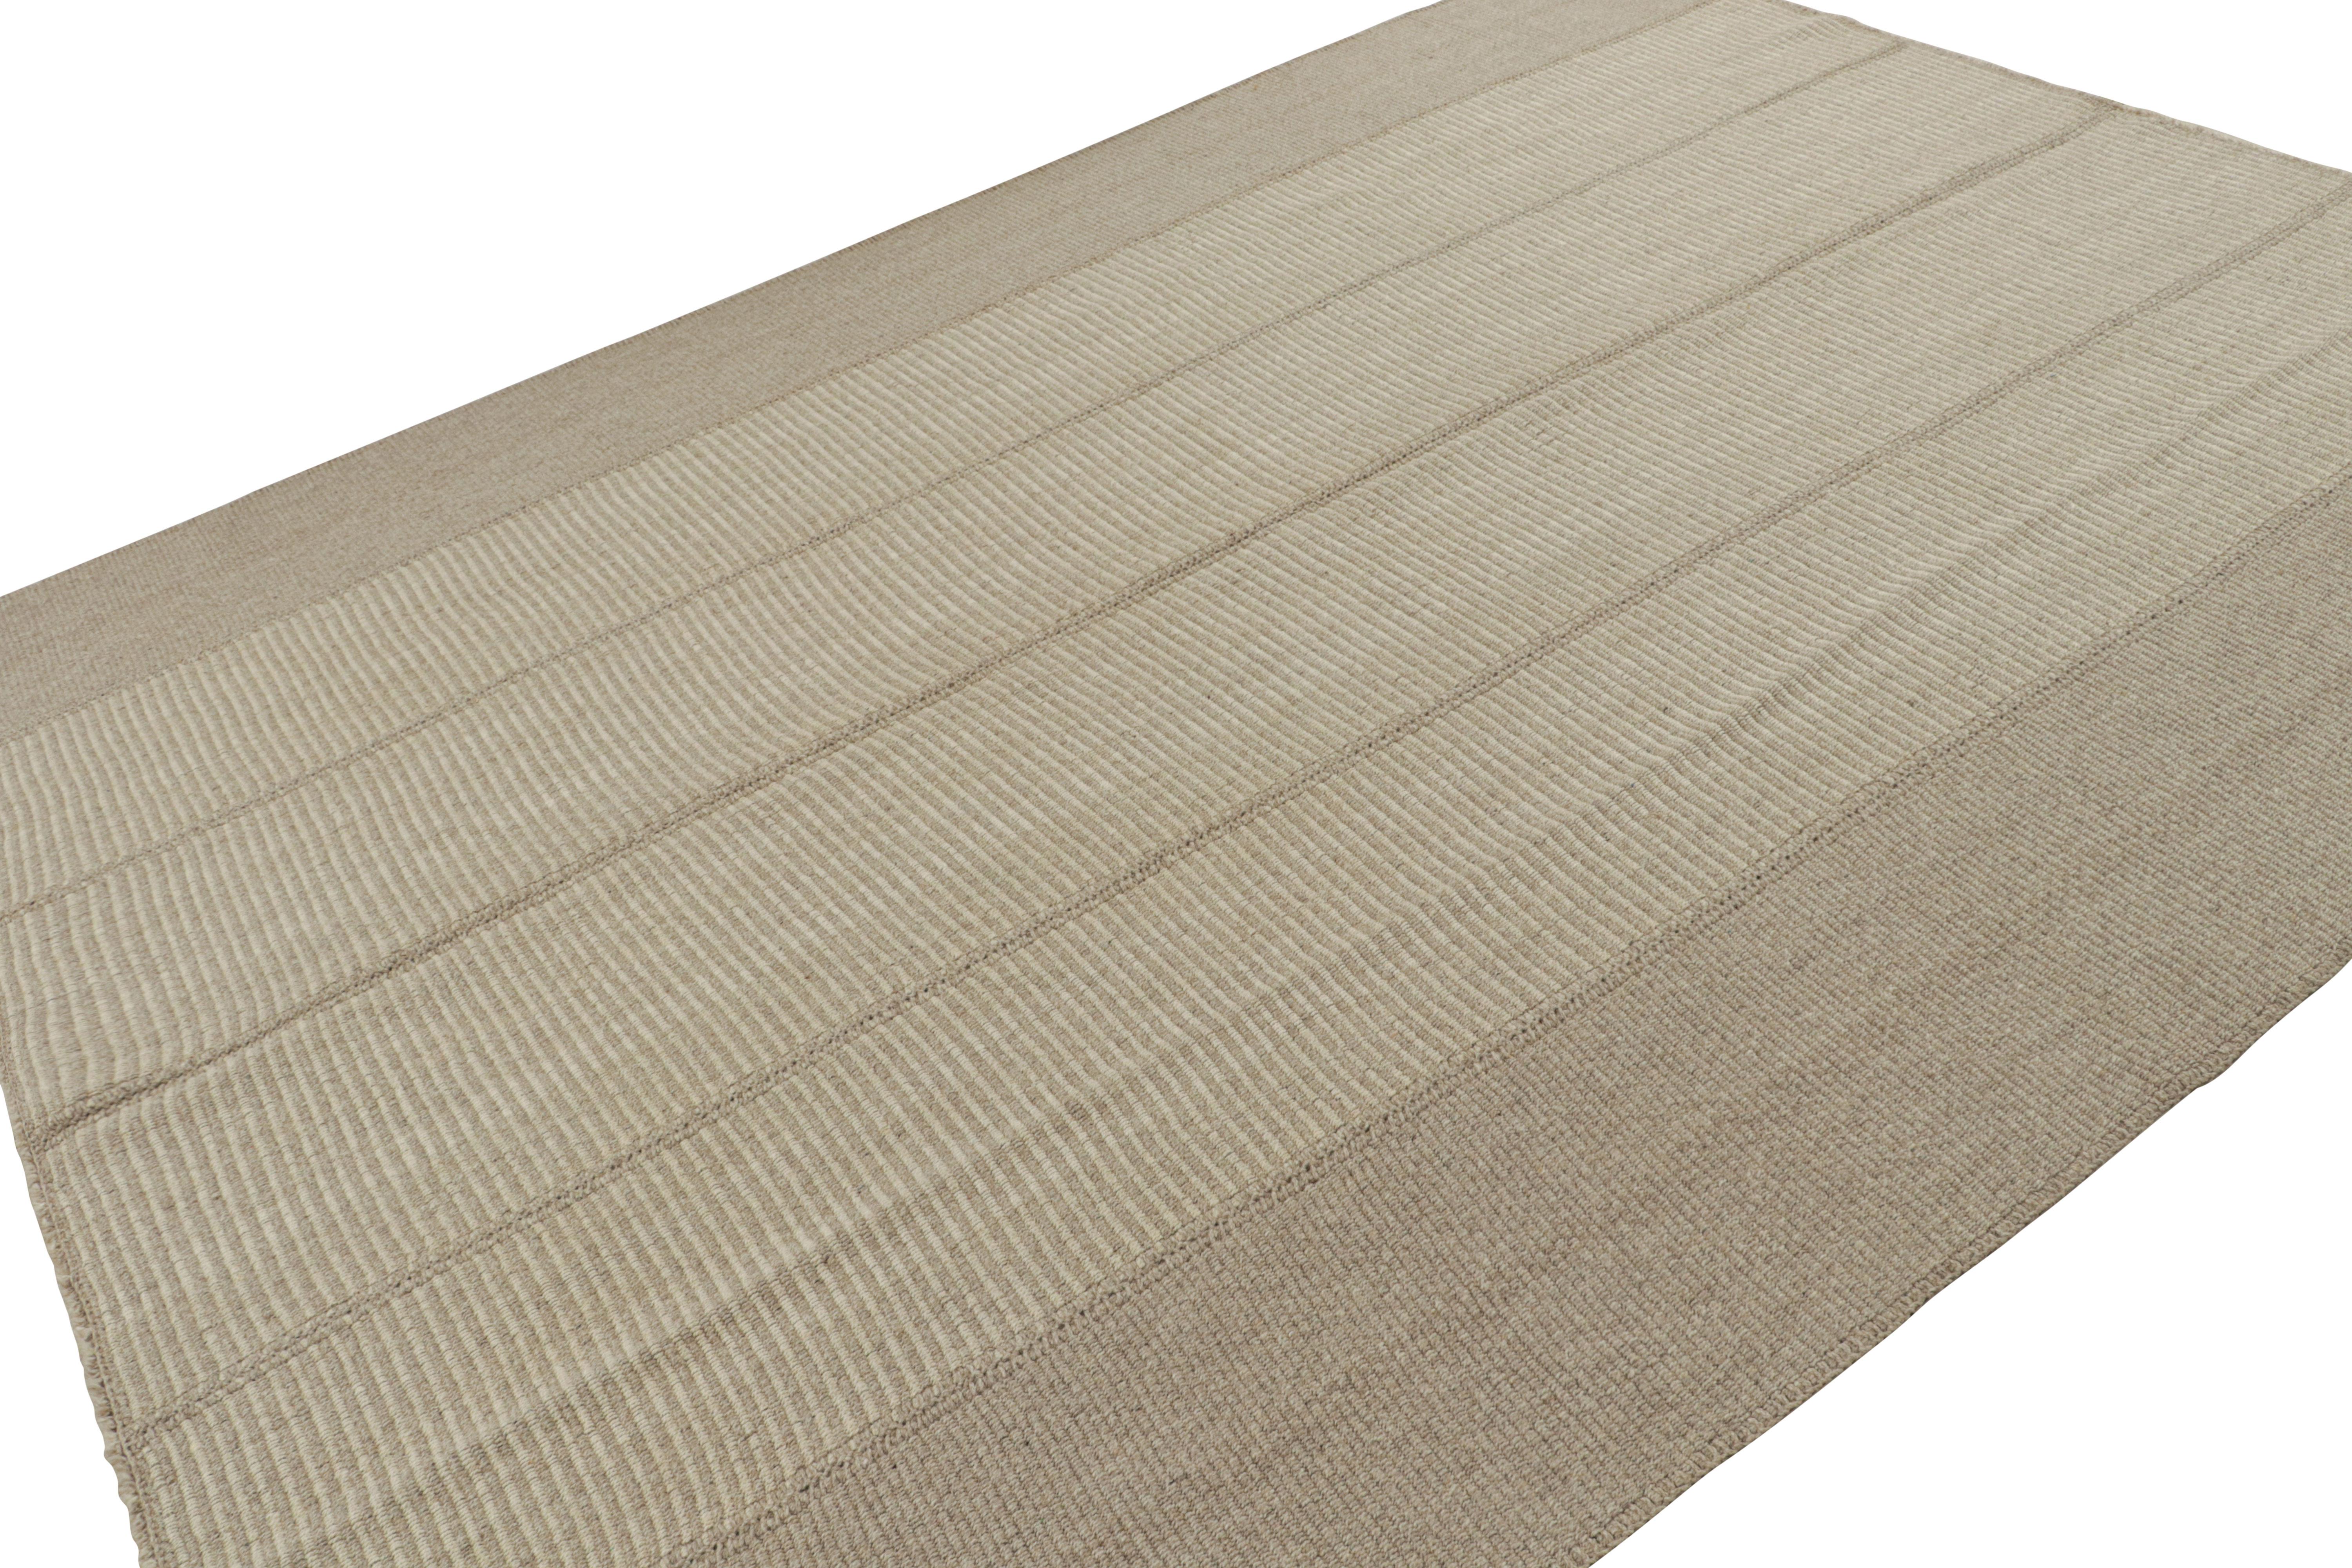 Handwoven in wool, a 9×12 Kilim with beige and brown textural stripes, from a bold new line of contemporary flatweaves, ‘Rez Kilim’, by Rug & Kilim.

On the design:  

Connoting a modern take on classic panel-weaving, our latest “Rez Kilim” enjoys